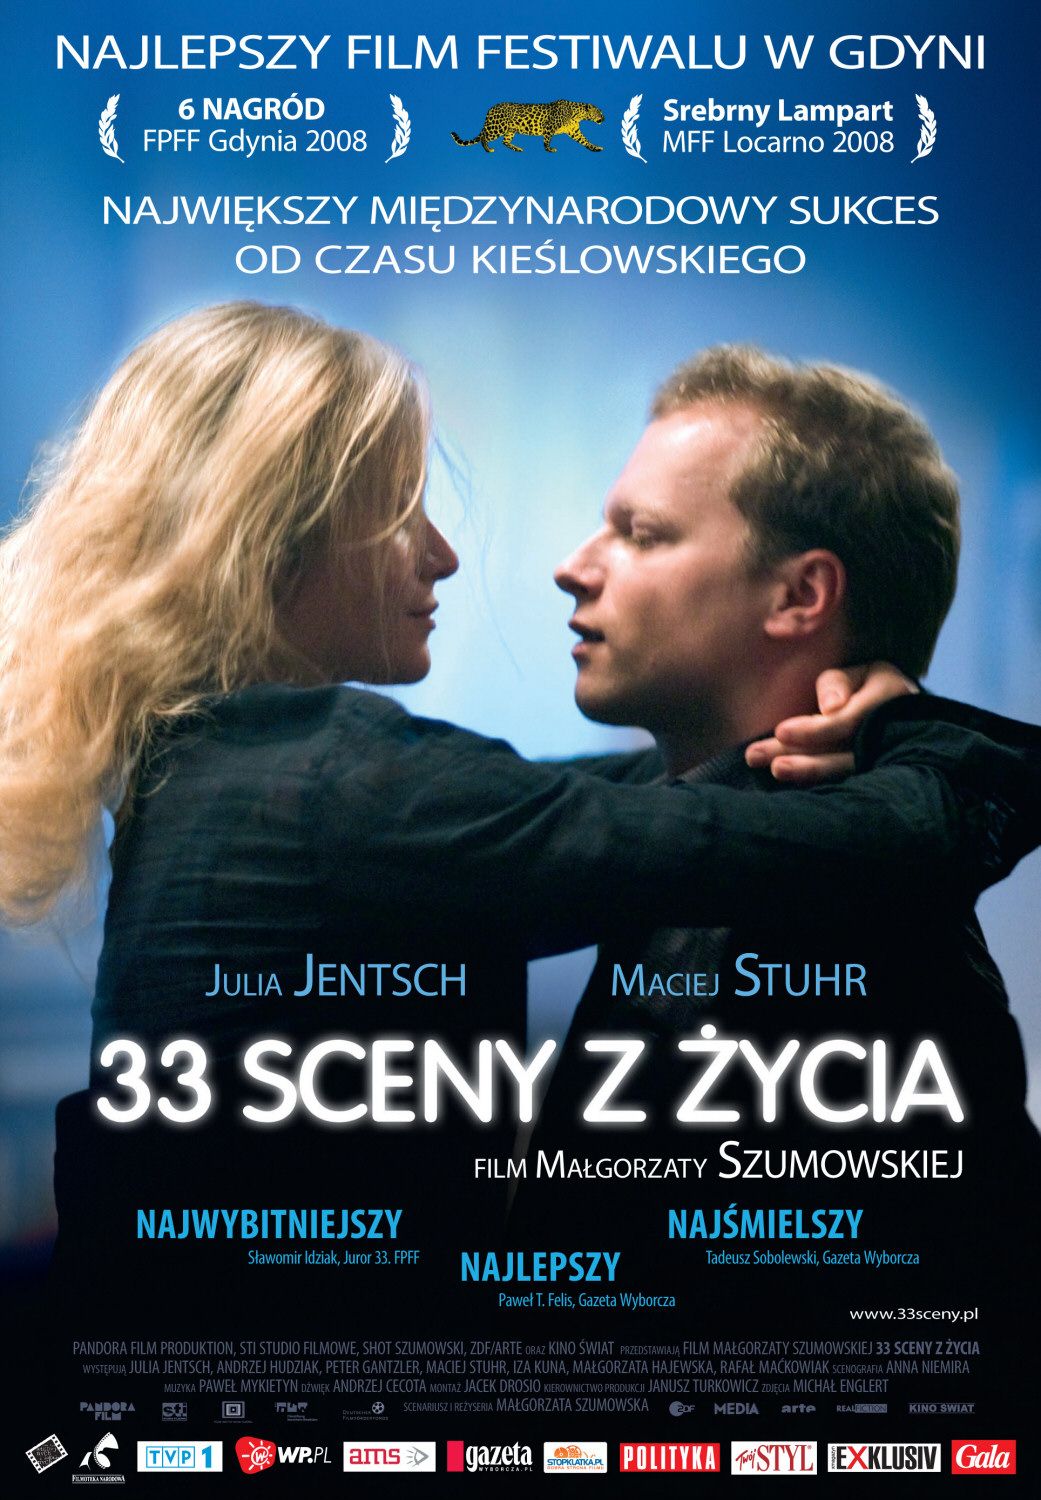 Extra Large Movie Poster Image for 33 sceny z zycia 